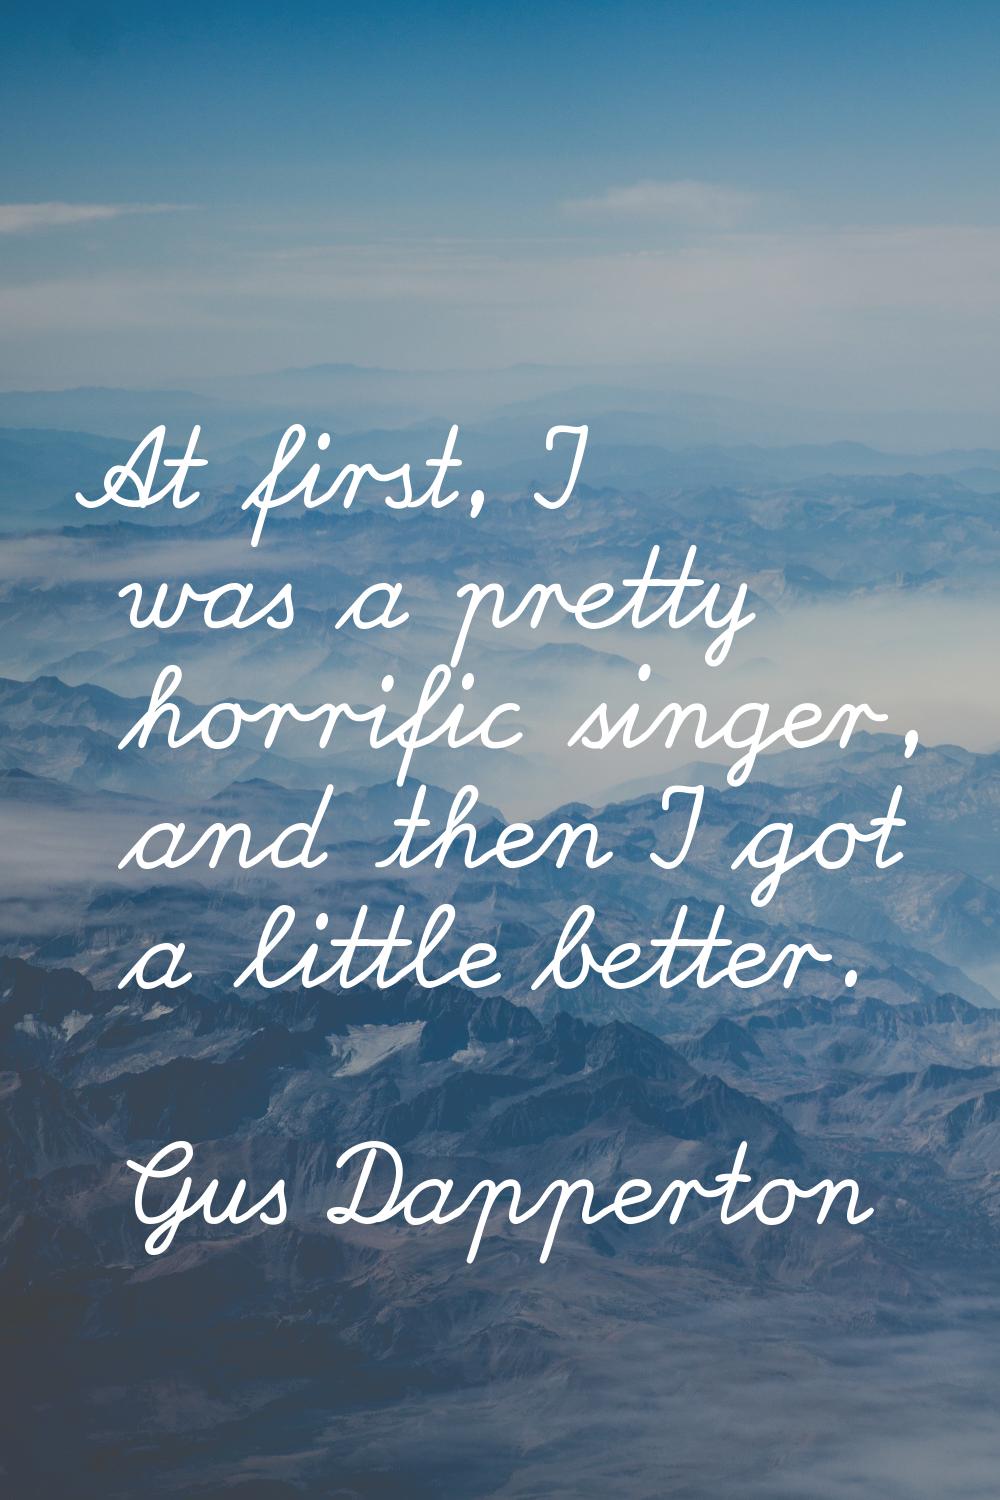 At first, I was a pretty horrific singer, and then I got a little better.